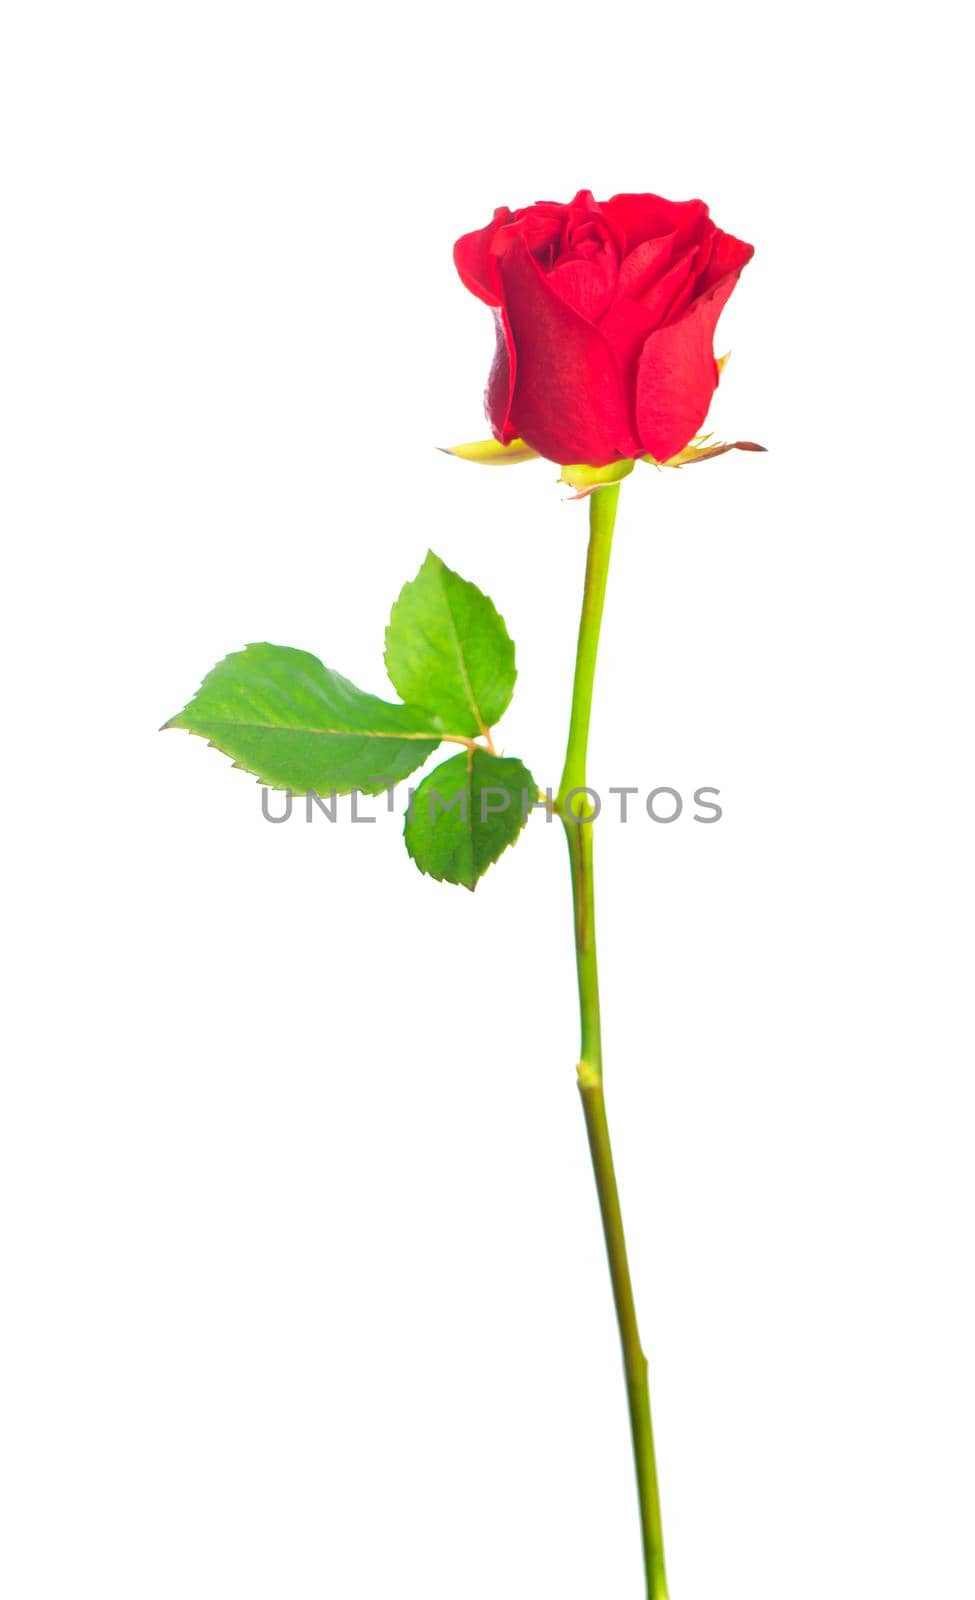 beautiful red rose on a white background by aprilphoto